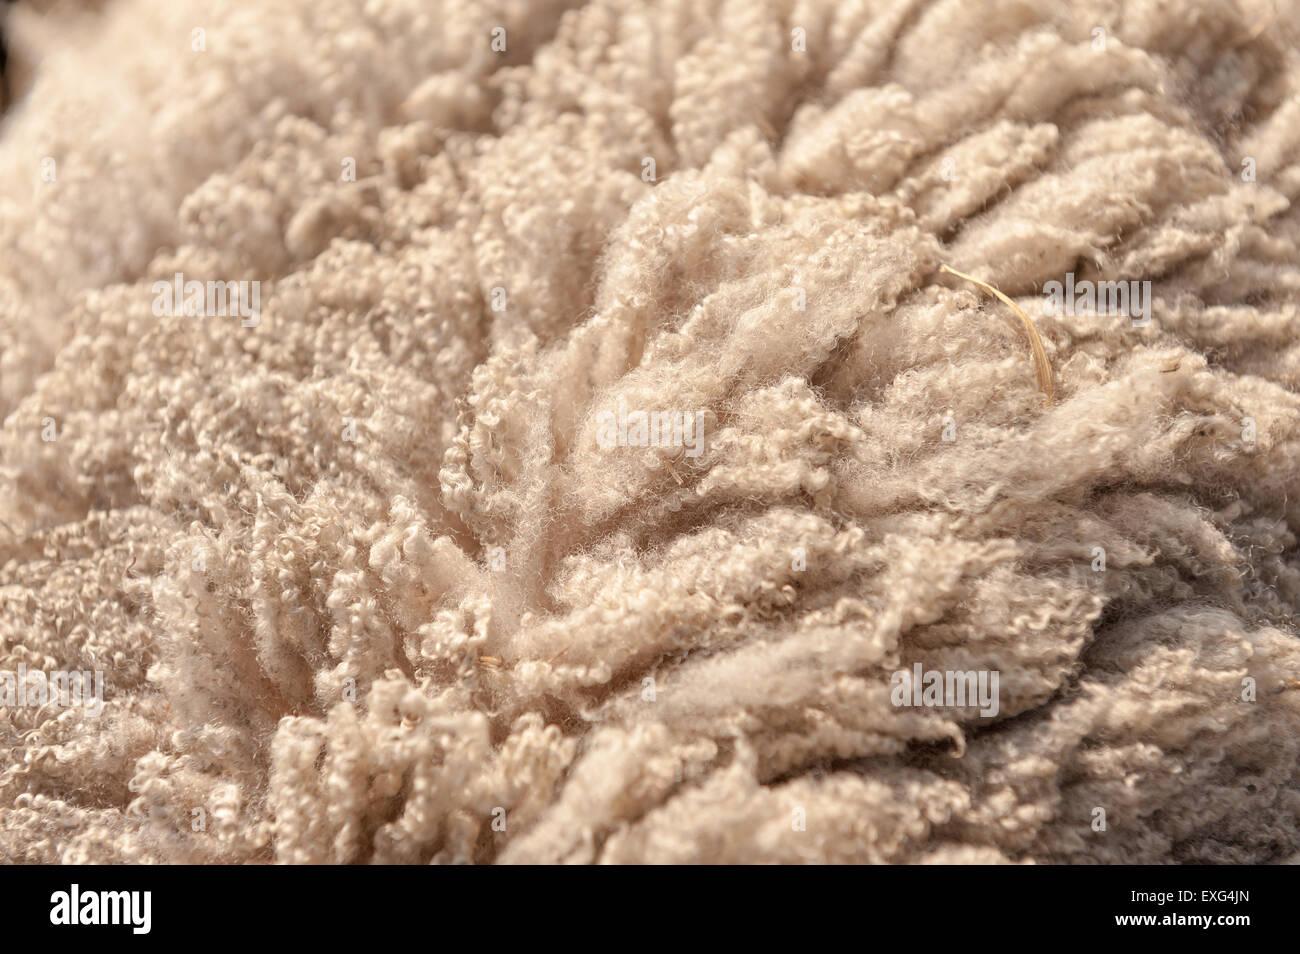 one year growth, a Shetland sheep wool coat close up before its sheared showing varied texture very soft and well crimped fleece Stock Photo